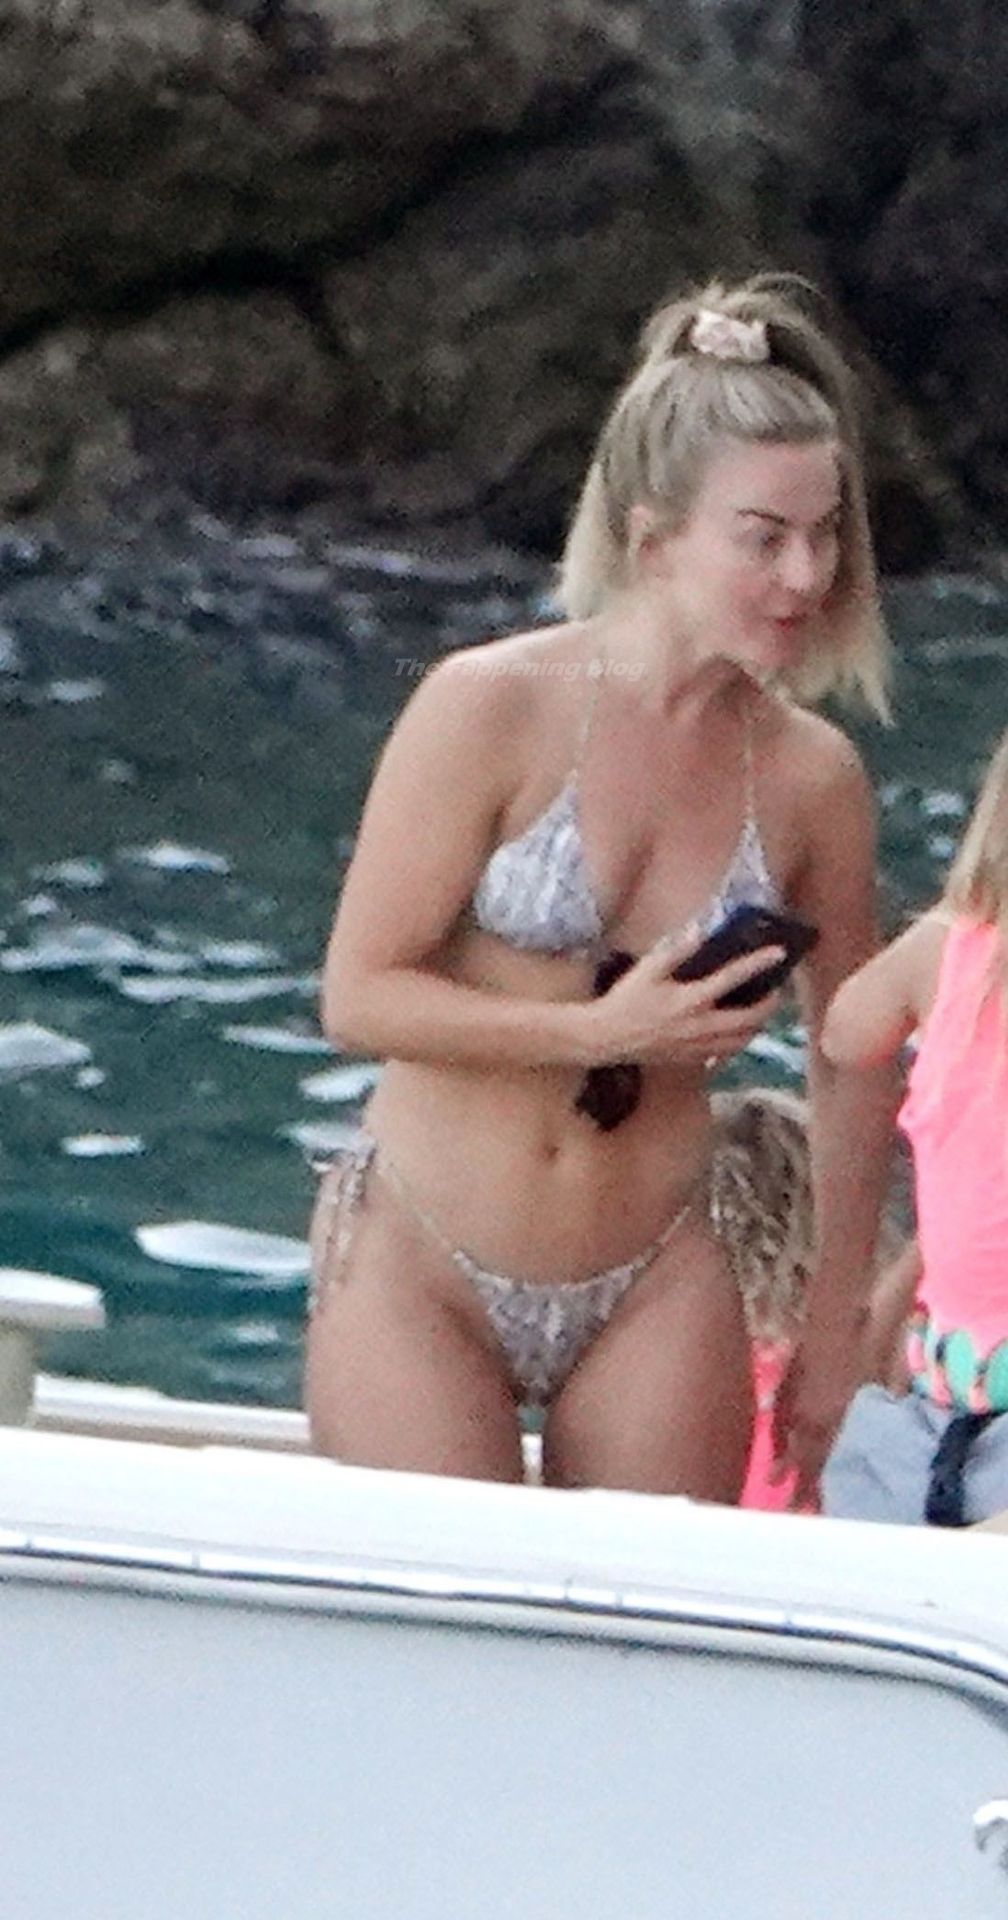 Julianne hough the fappening